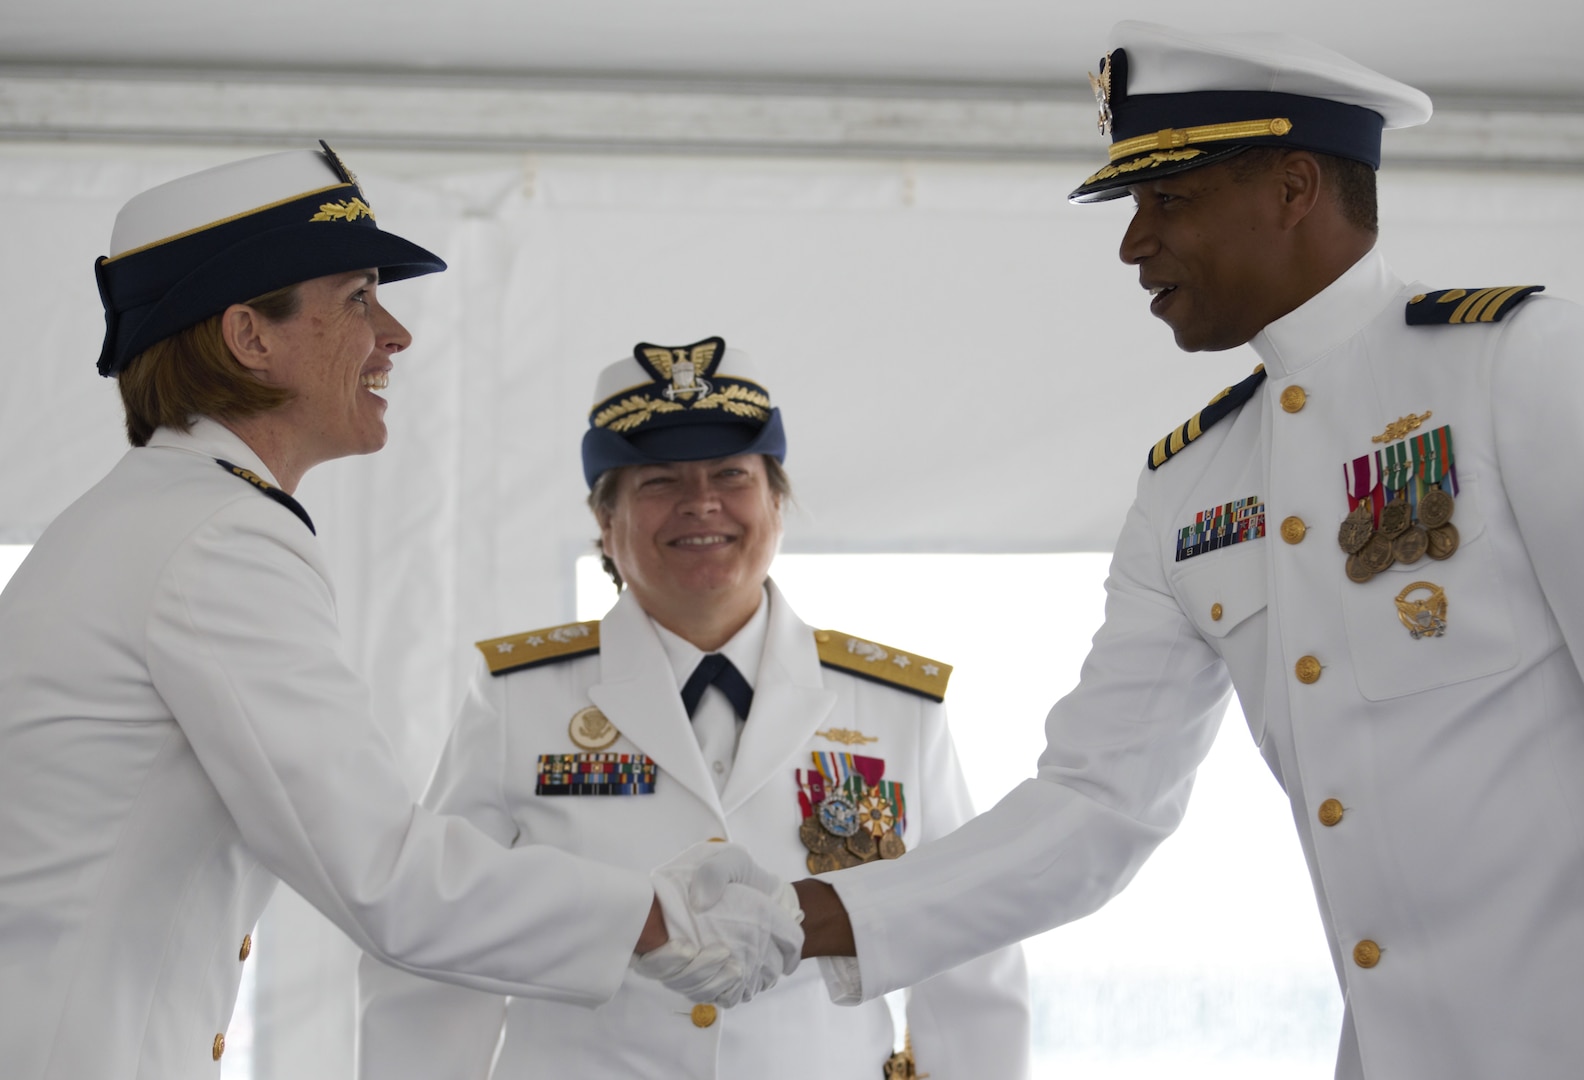 U.S. Coast Guard Cmdr. Jonathan Harris, right, relieves Capt. Anne O’Connell, left, as commanding officer of the USCGC Campbell (WMEC 909) during a change of command ceremony, June 9, 2023, at Naval Station Newport. Rear Adm. Laura Dickey, middle, deputy commander of Coast Guard Atlantic Area, presided over the ceremony. (U.S. Coast Guard photo by Petty Officer 2nd Class Eric Desirey)